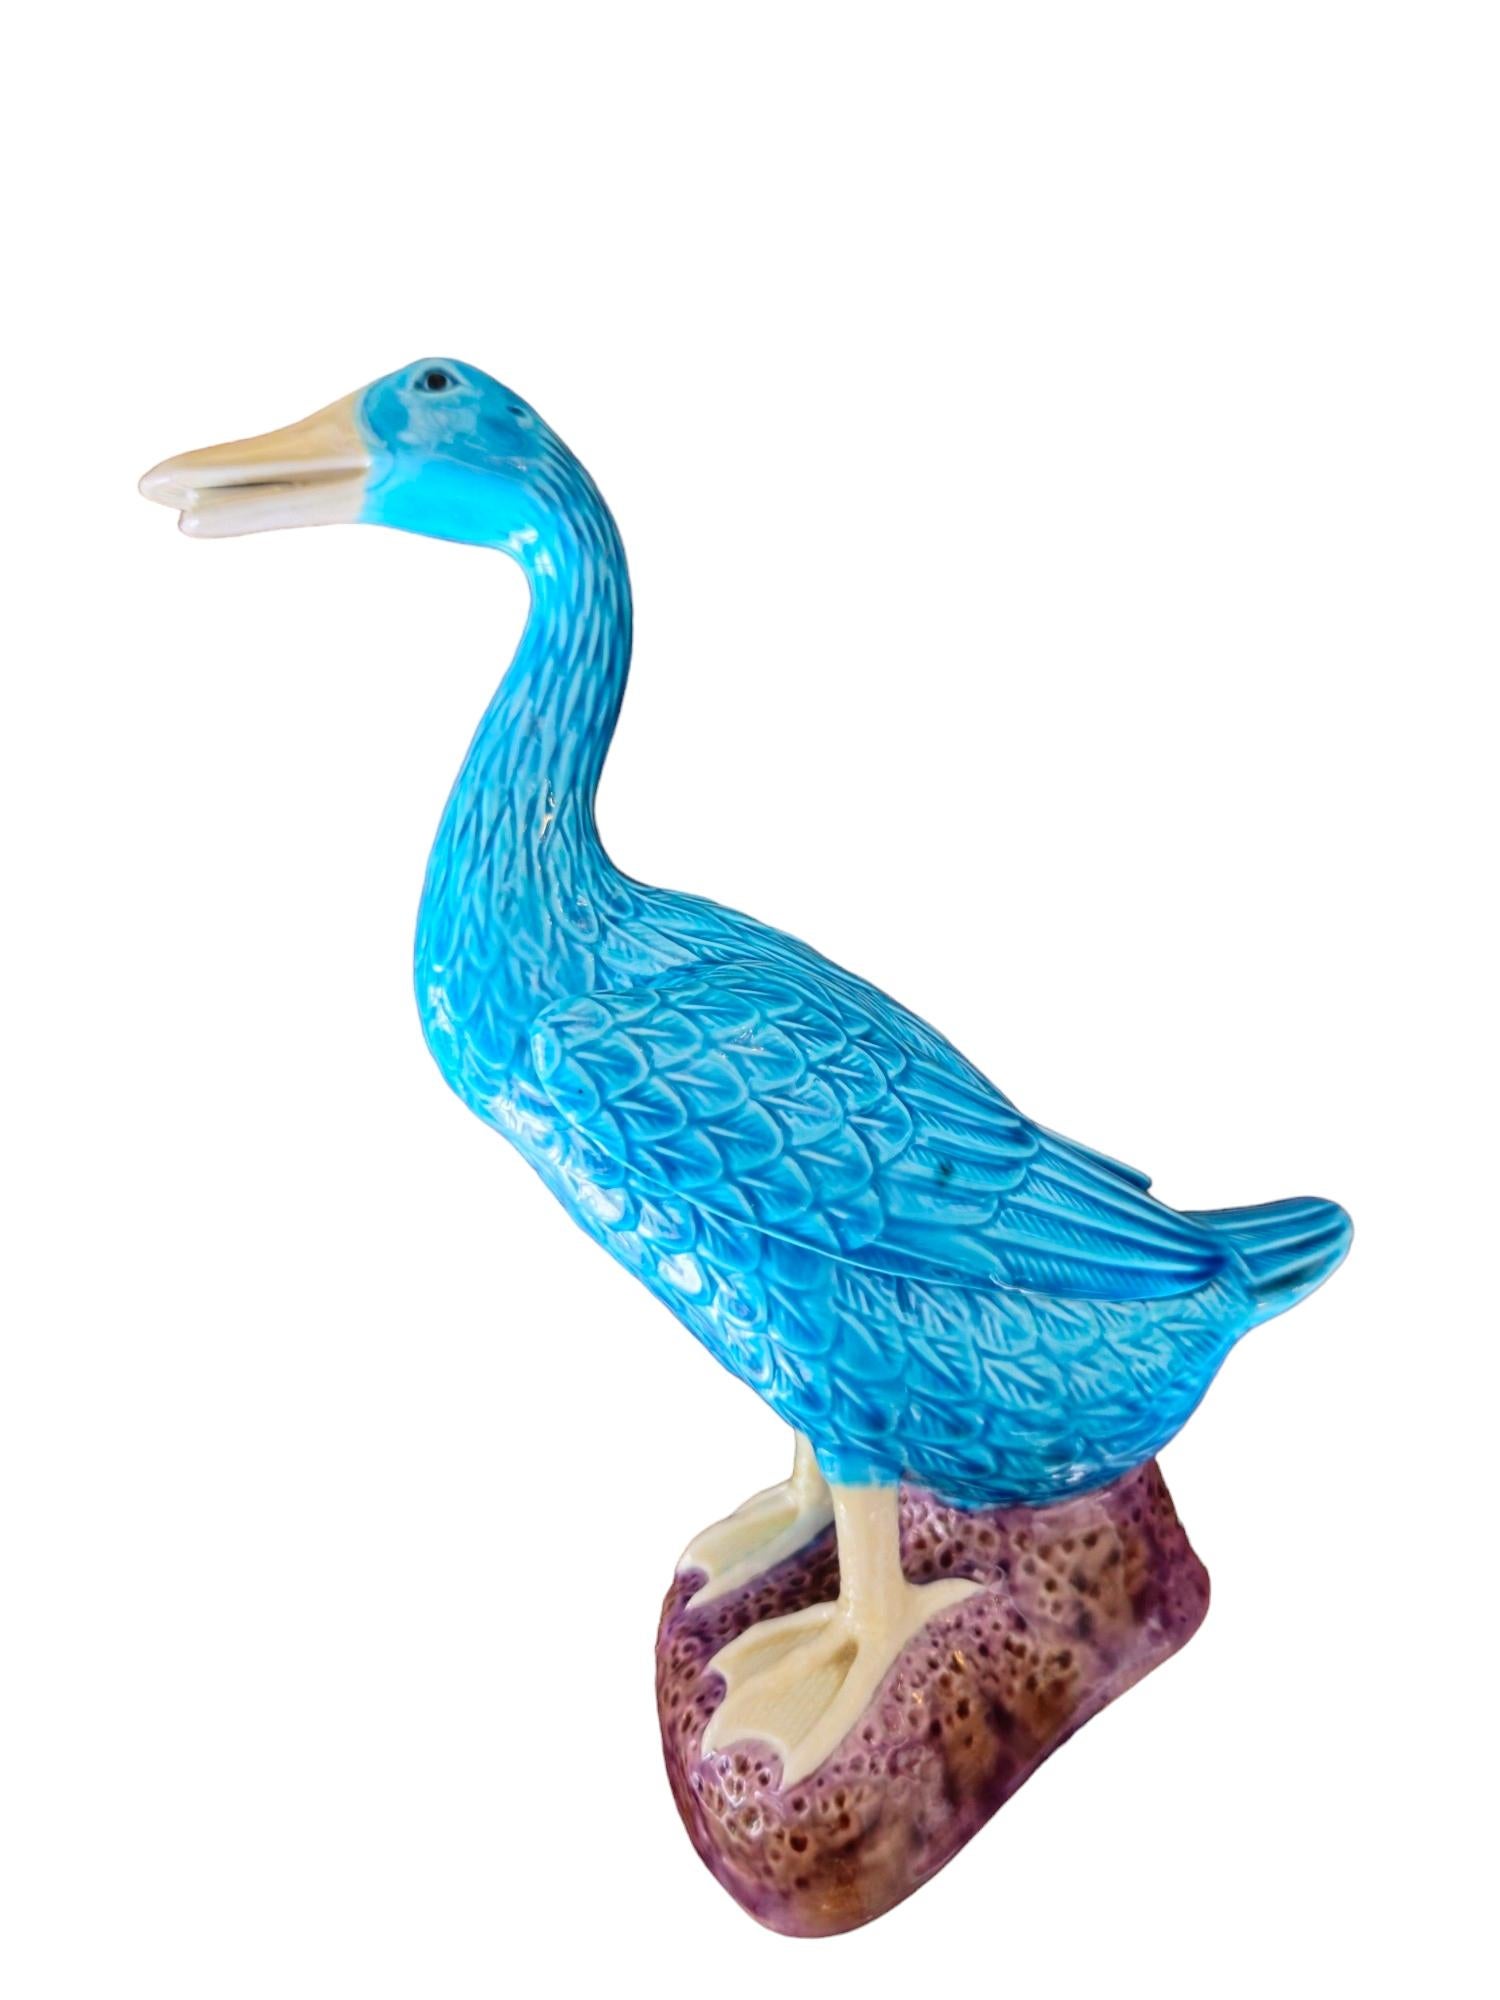 Behold a magnificent Large Early 20th Century Glazed Ceramic Blue Duck with a regal purple base. This exquisite avian masterpiece encapsulates the elegance of bygone eras, showcasing meticulous craftsmanship and timeless aesthetic appeal. Standing